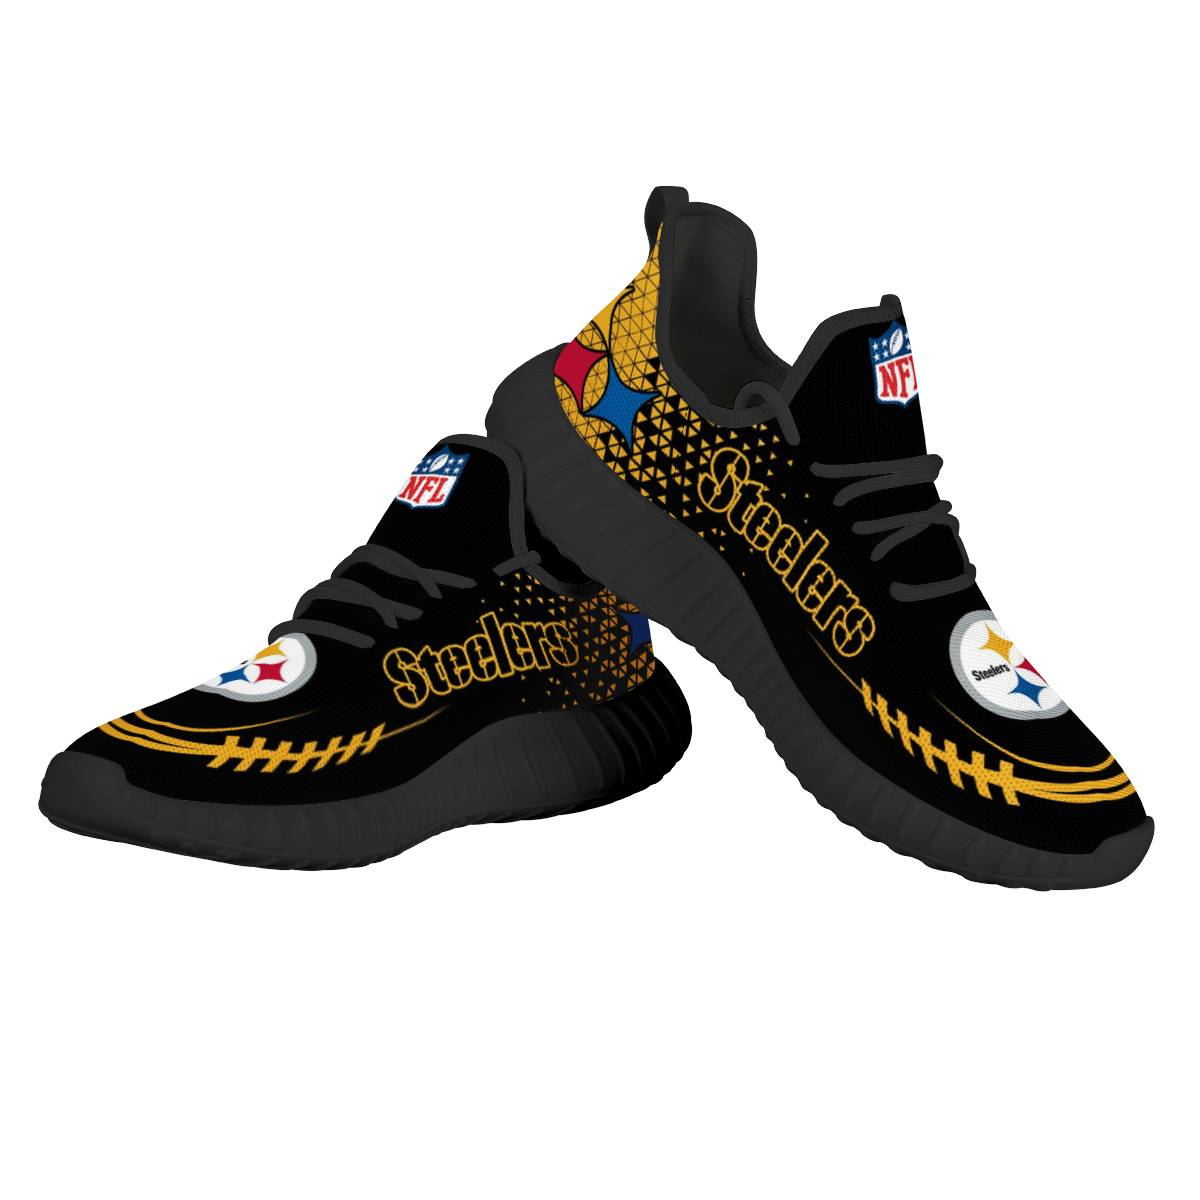 Men's Pittsburgh Steelers Mesh Knit Sneakers/Shoes 010